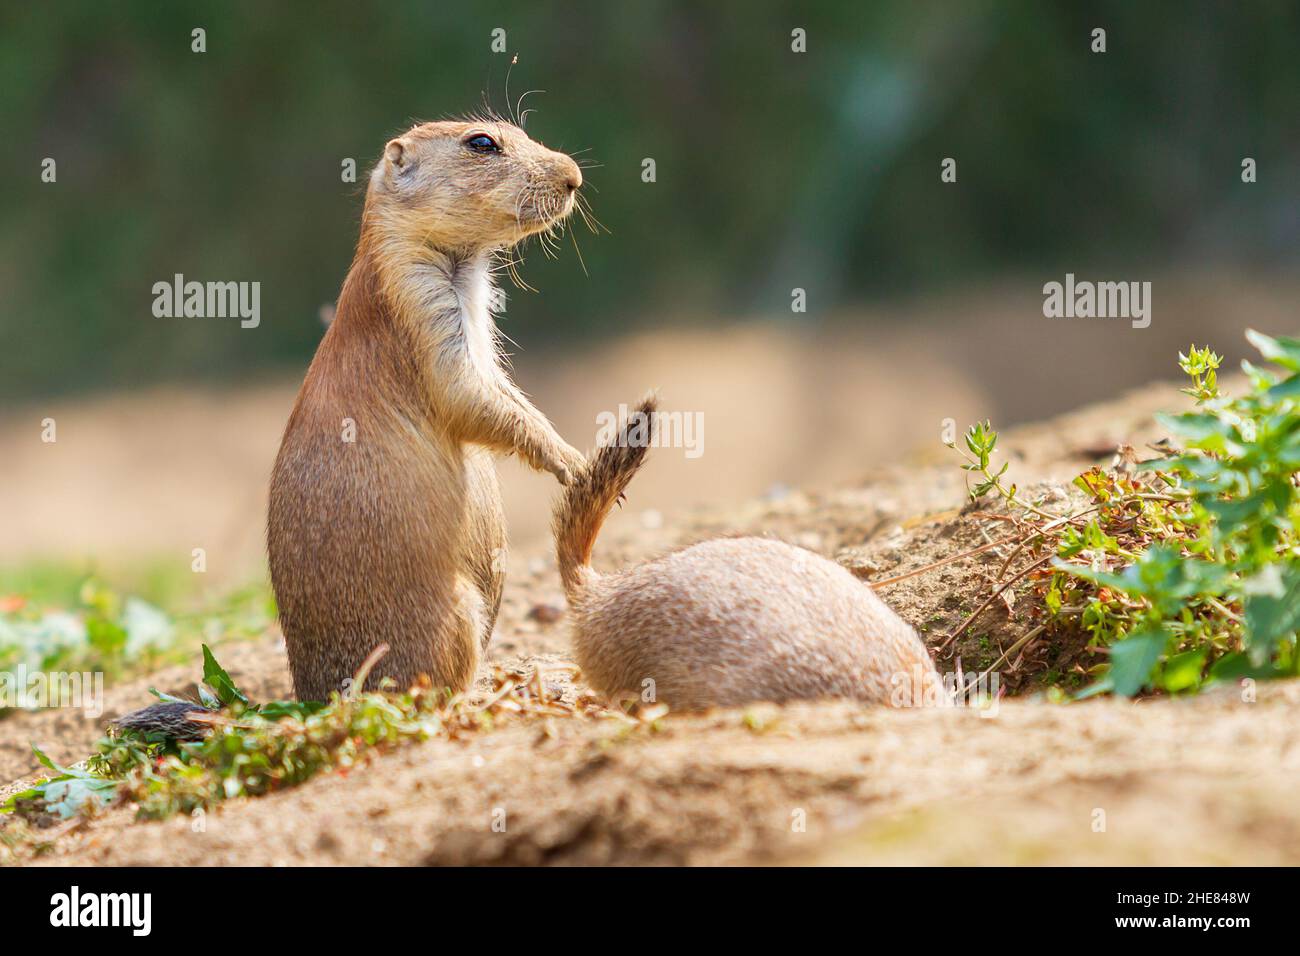 Ground squirrel - Spermophilus citellus stands in a meadow and the other ground squirrel climbs into a hole Stock Photo